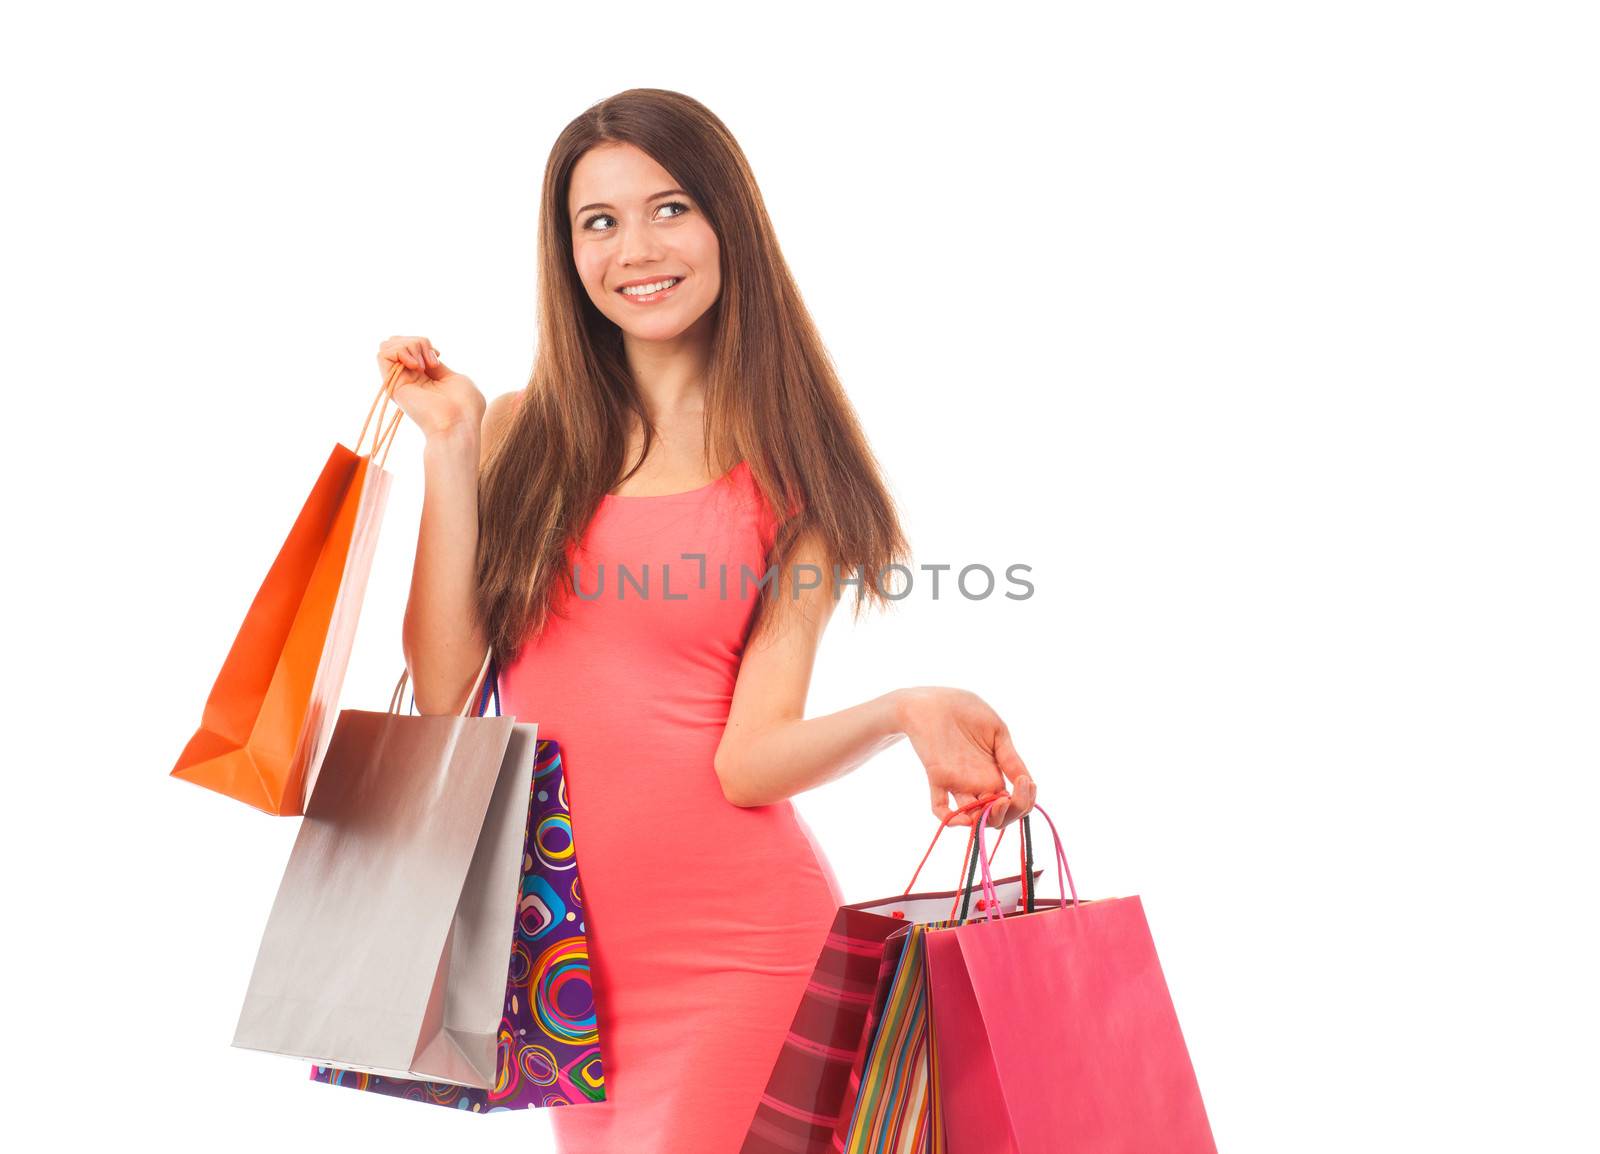 Attractive young woman holding shopping bags by TristanBM